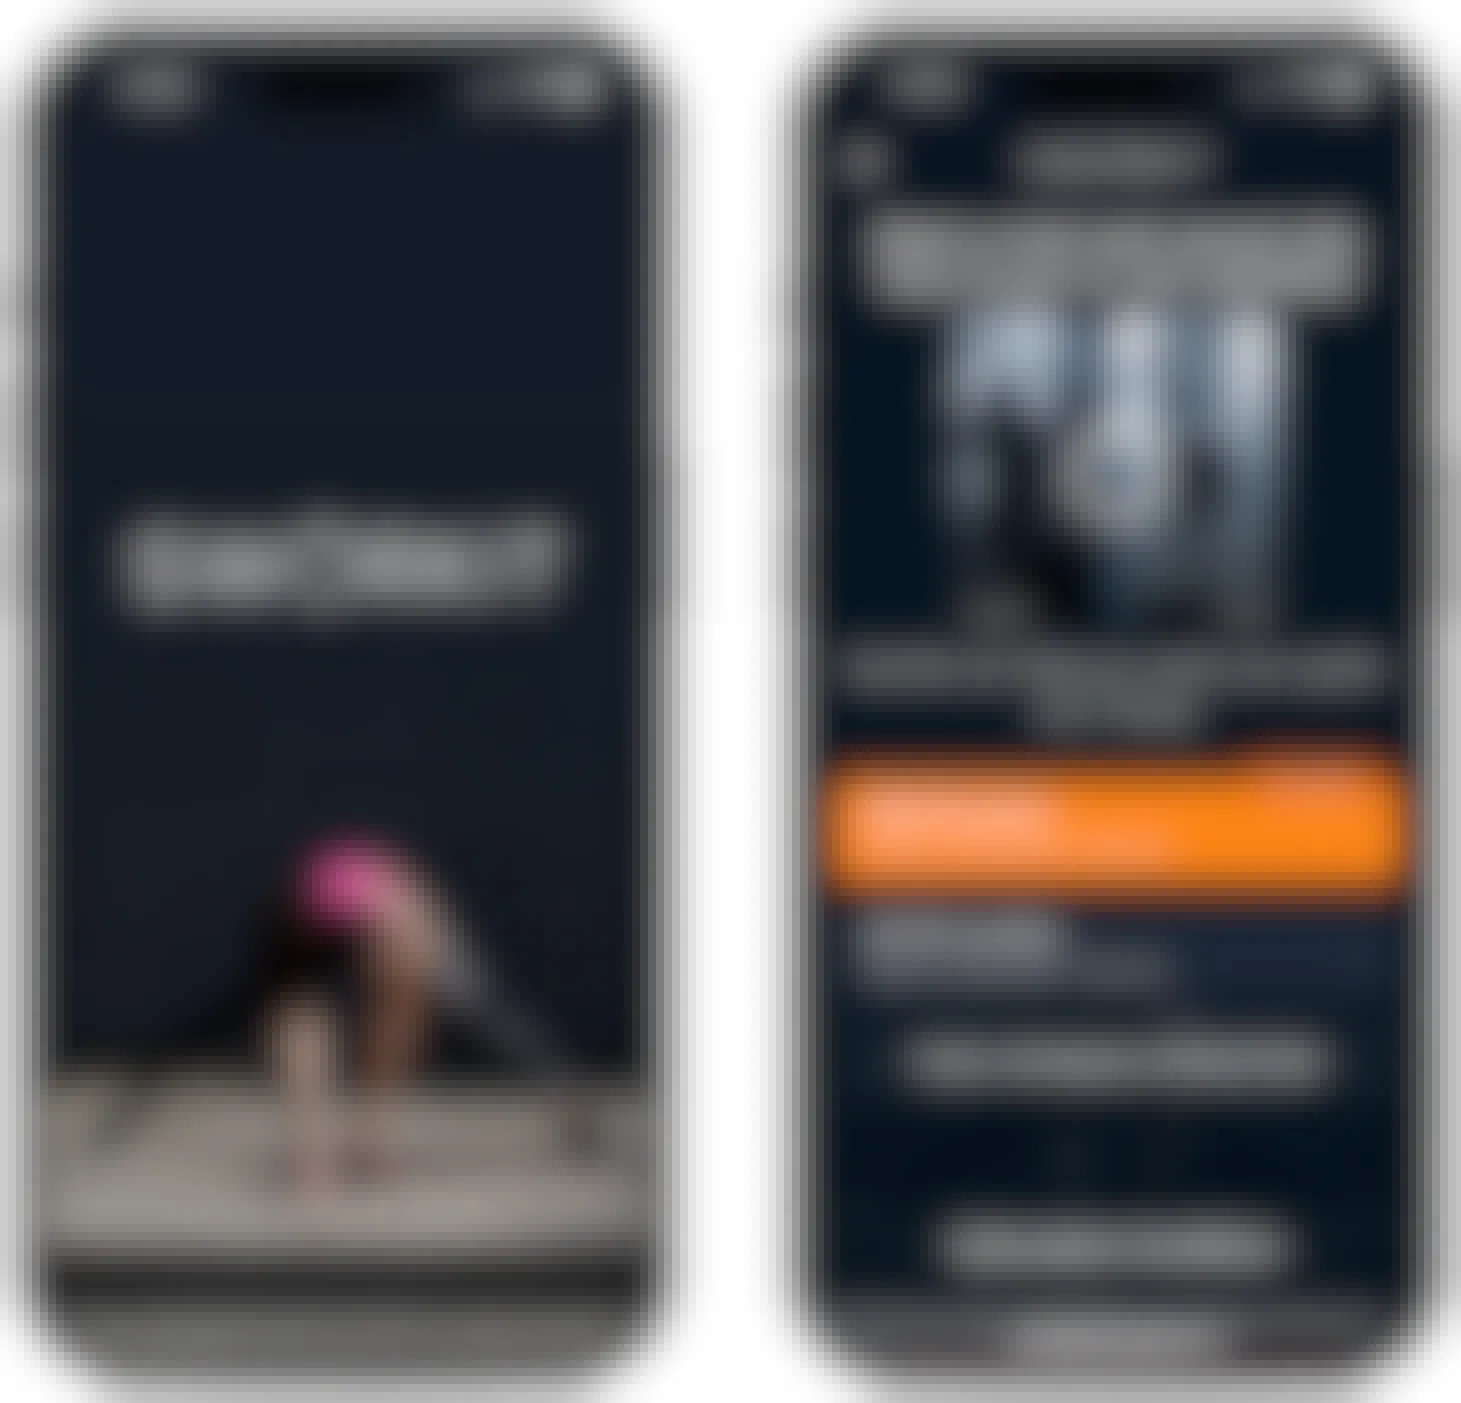 Screenshots from the Sworkit fitness app on two iPhone screens